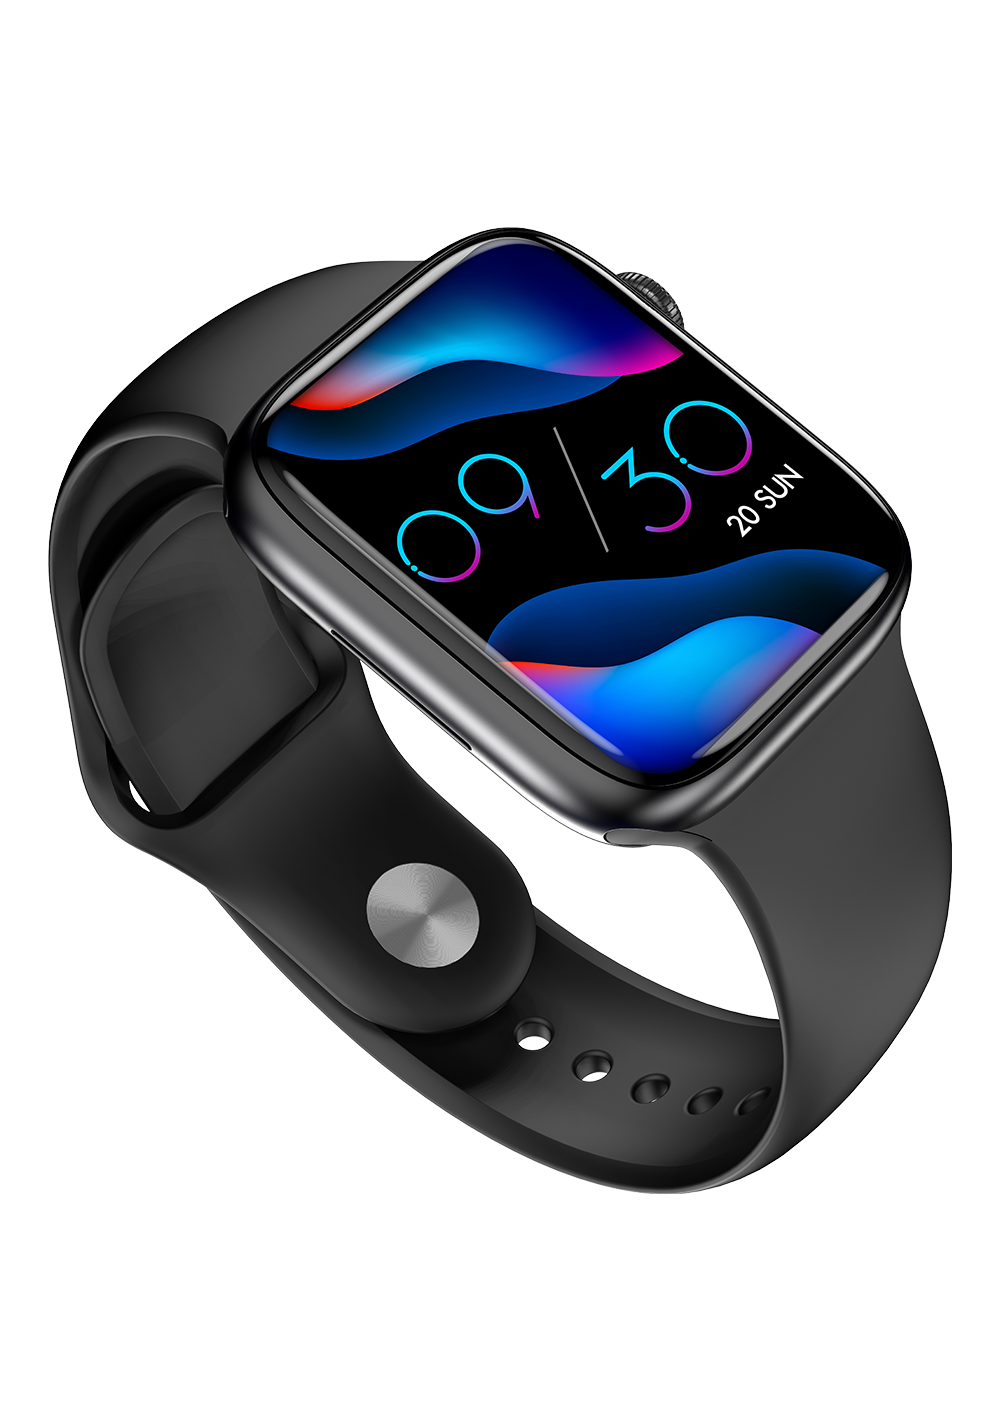 Crossbeats launches IGNITE S5 in the Smart Wearables category